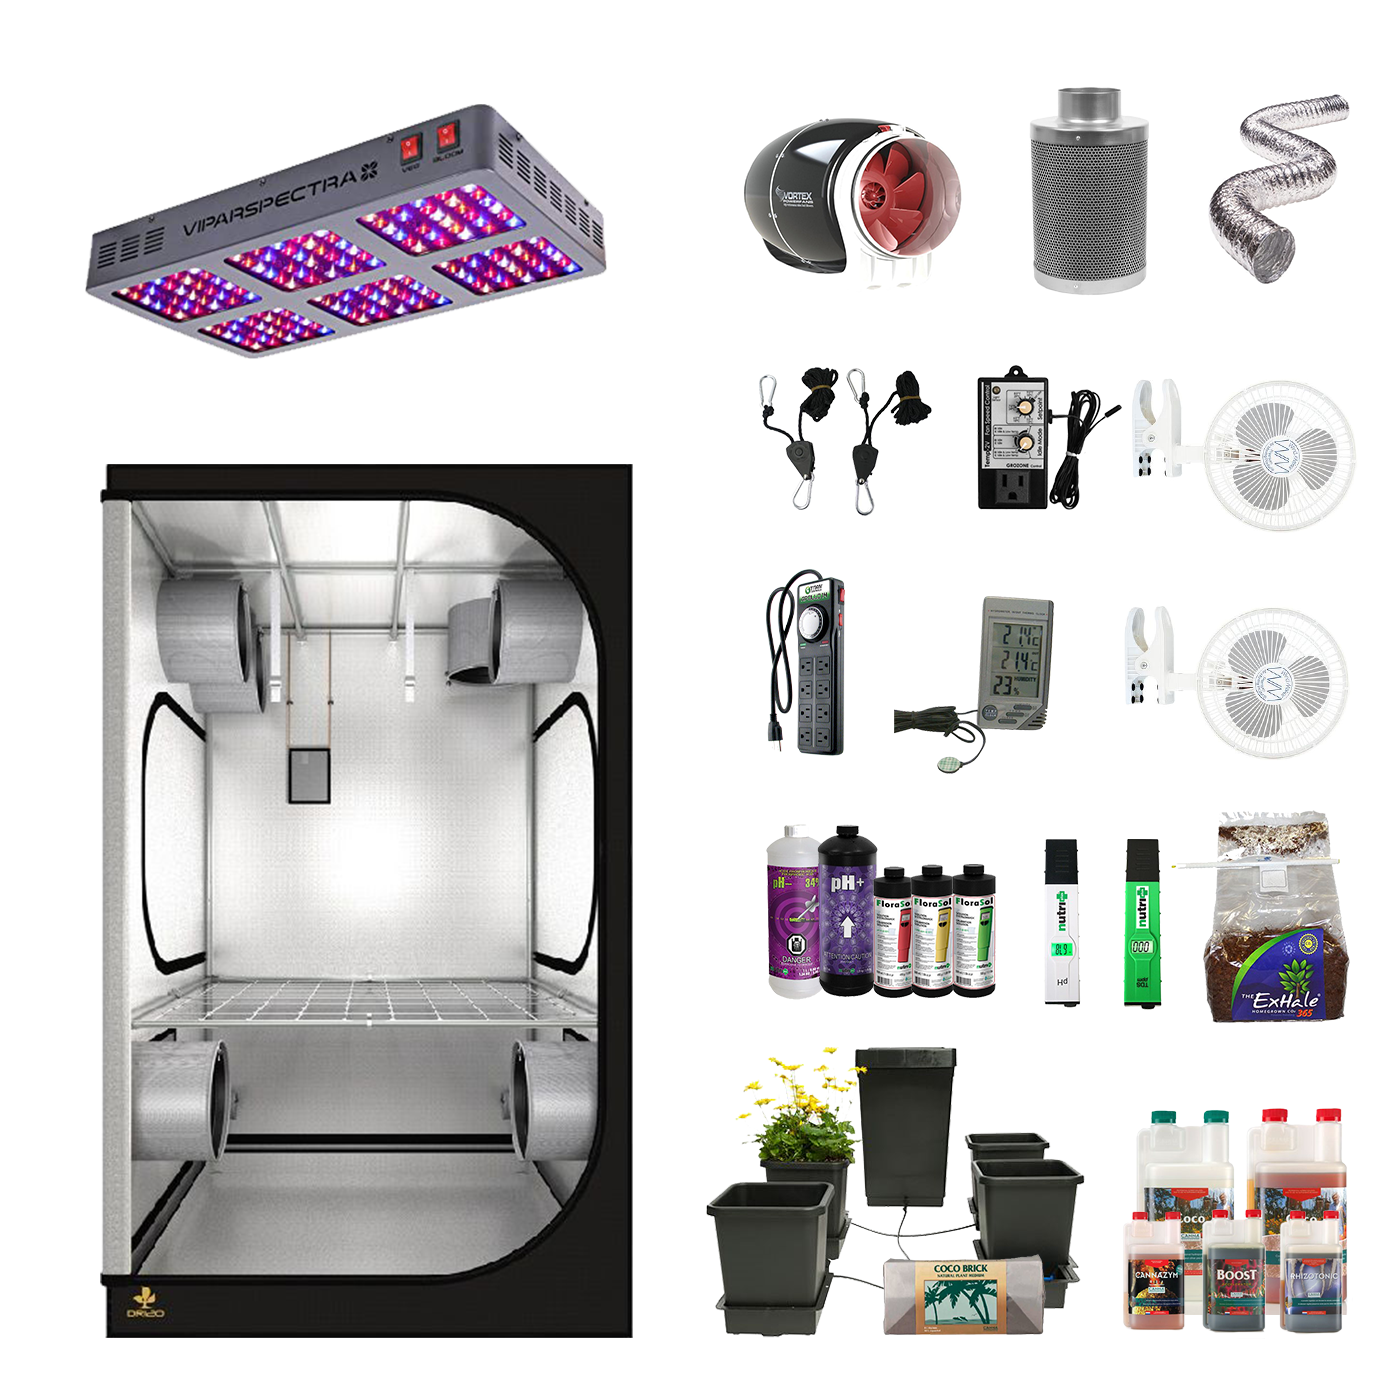 4' X 4' LED Hydroponic Indoor Grow Tent Kits for 4 Plants